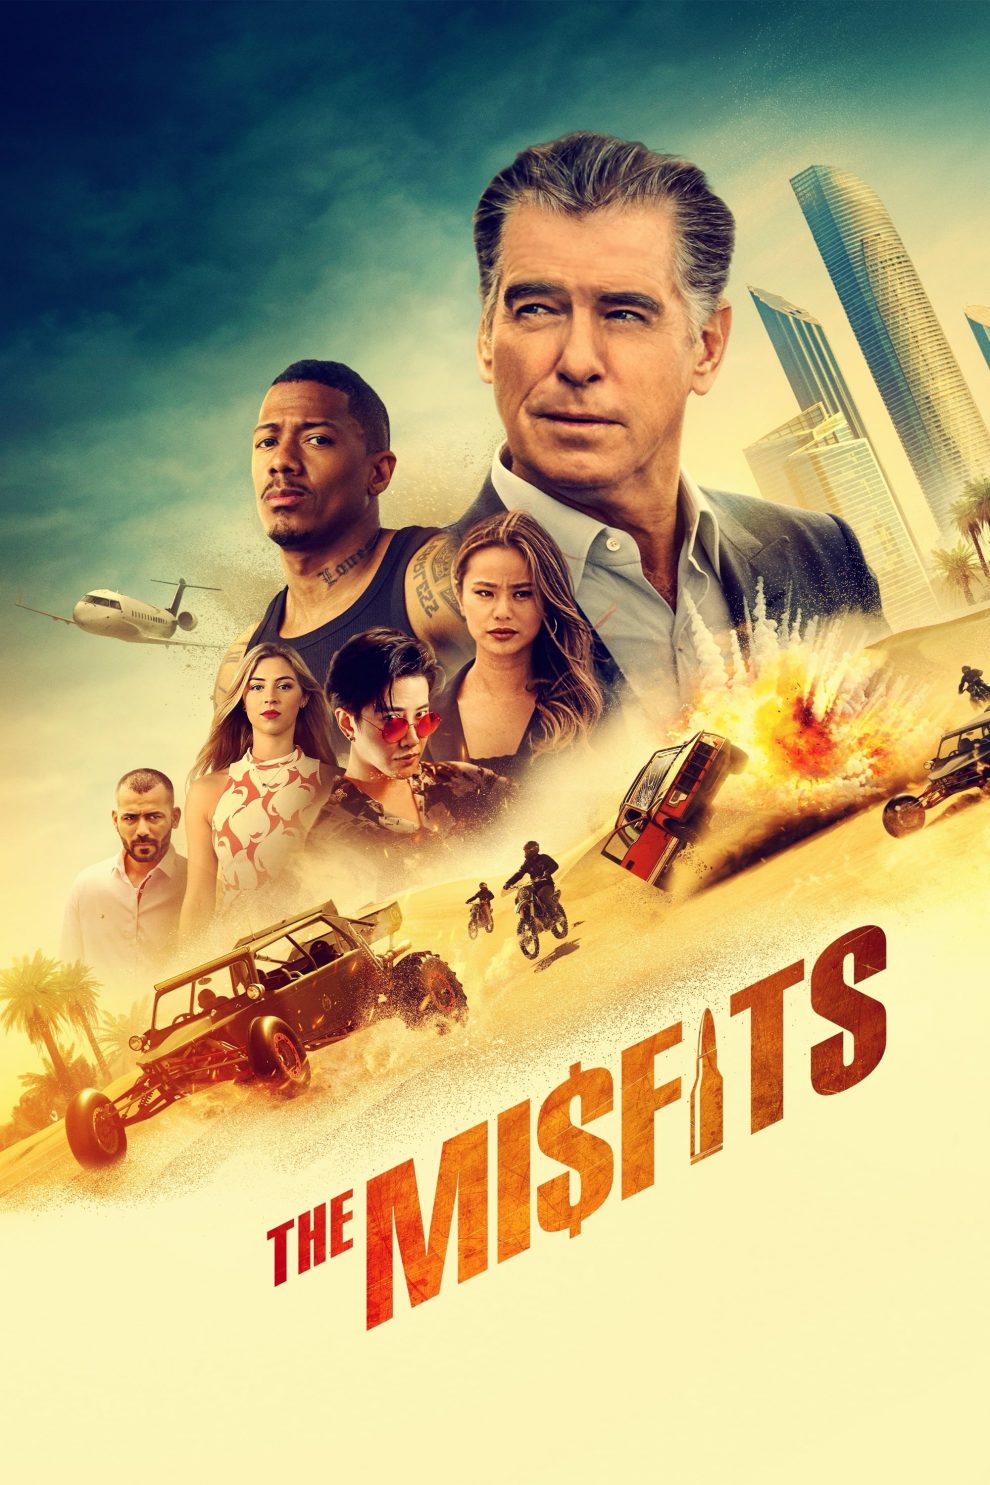 Poster for the movie "The Misfits"